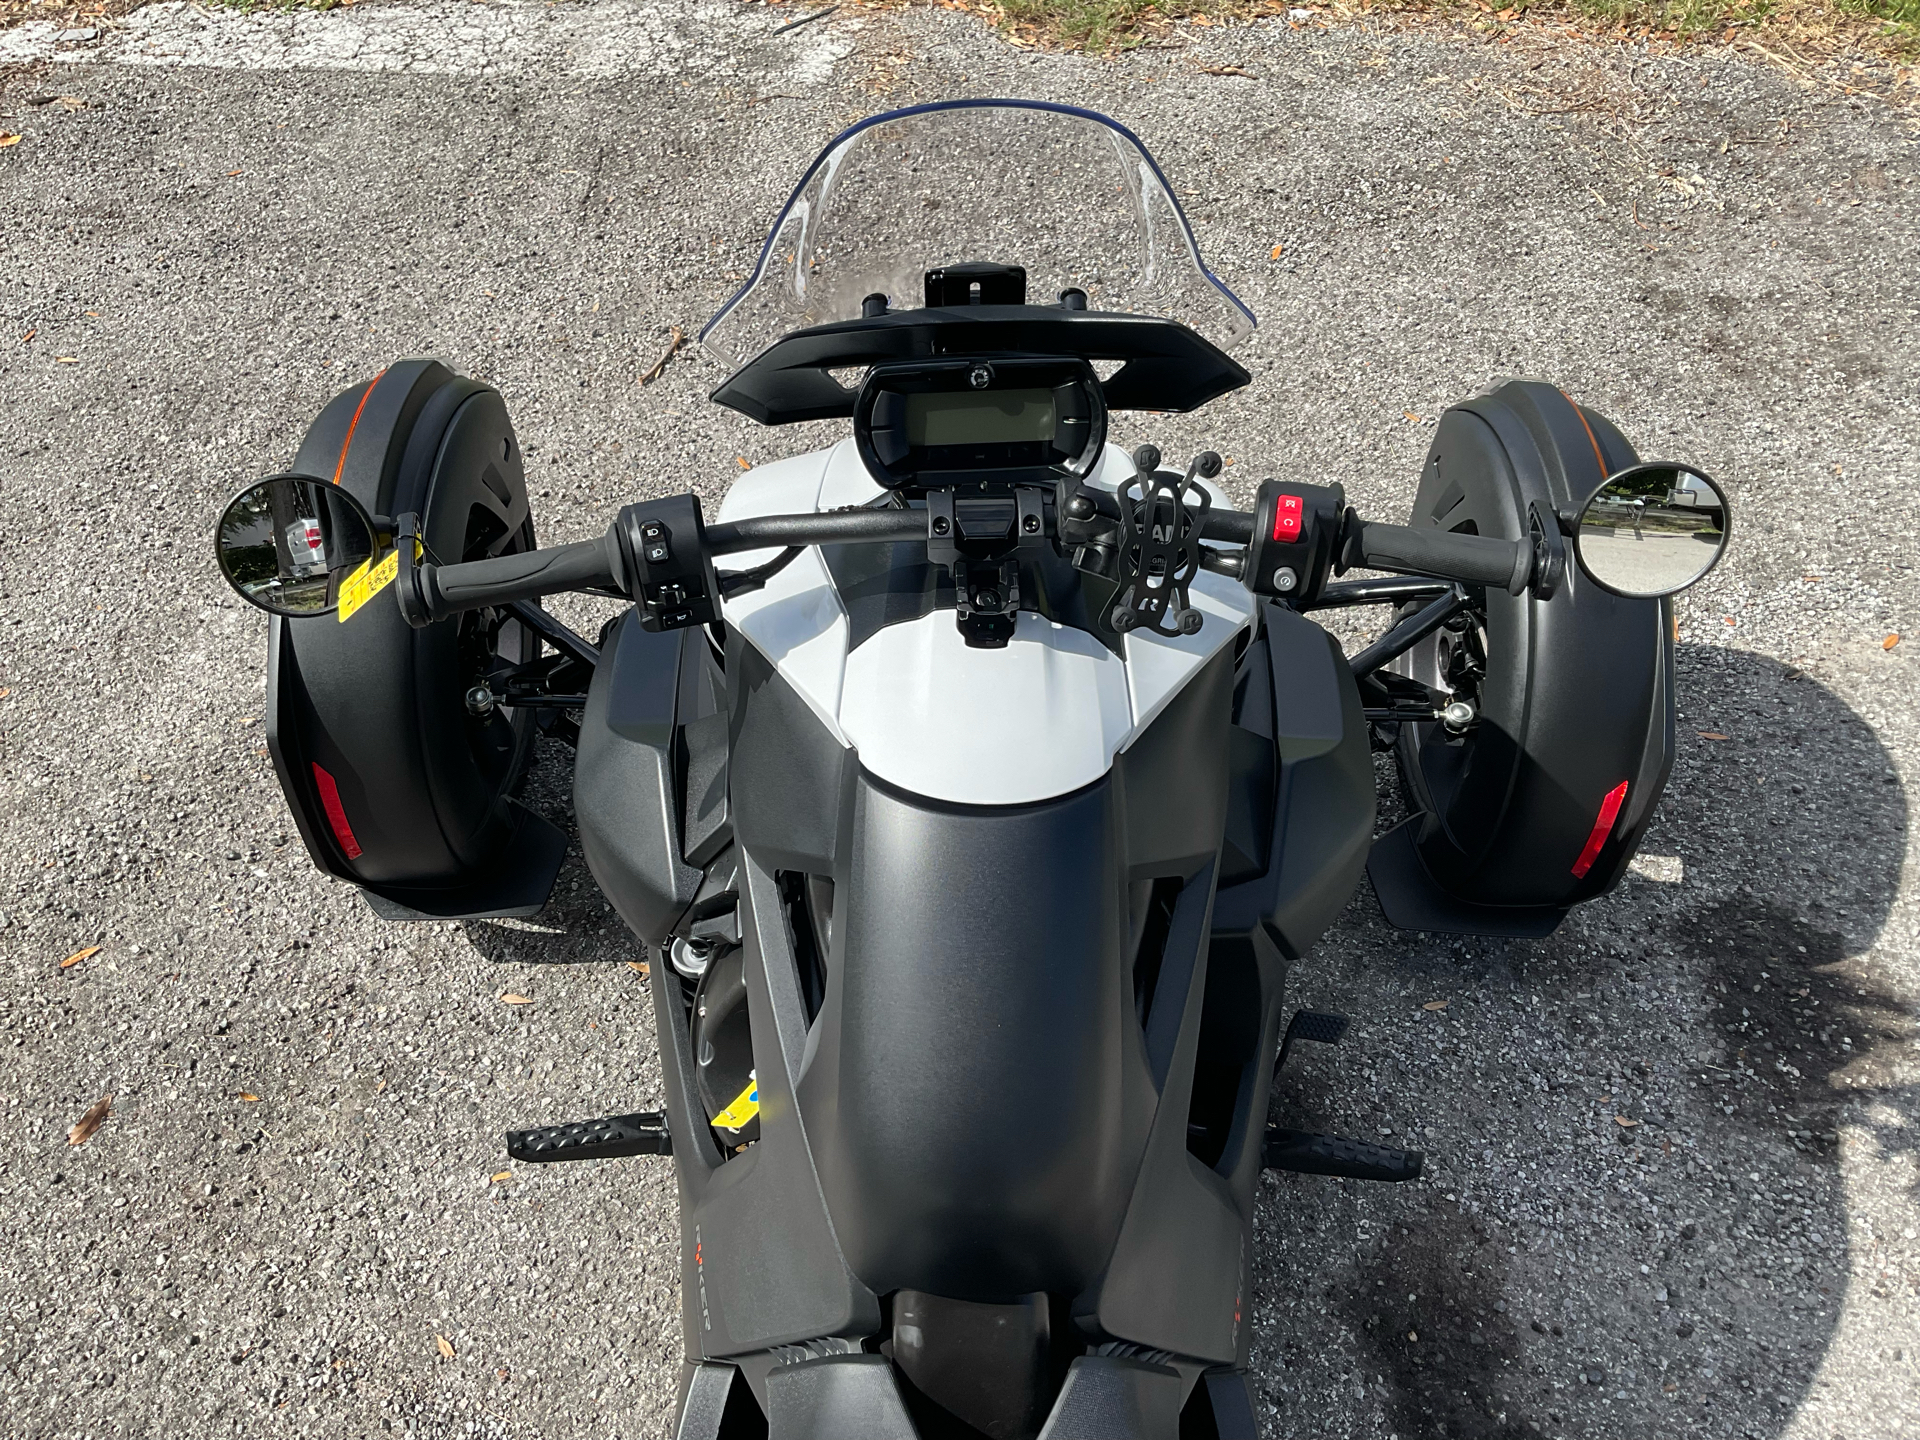 2021 Can-Am Ryker 600 ACE in Sanford, Florida - Photo 25